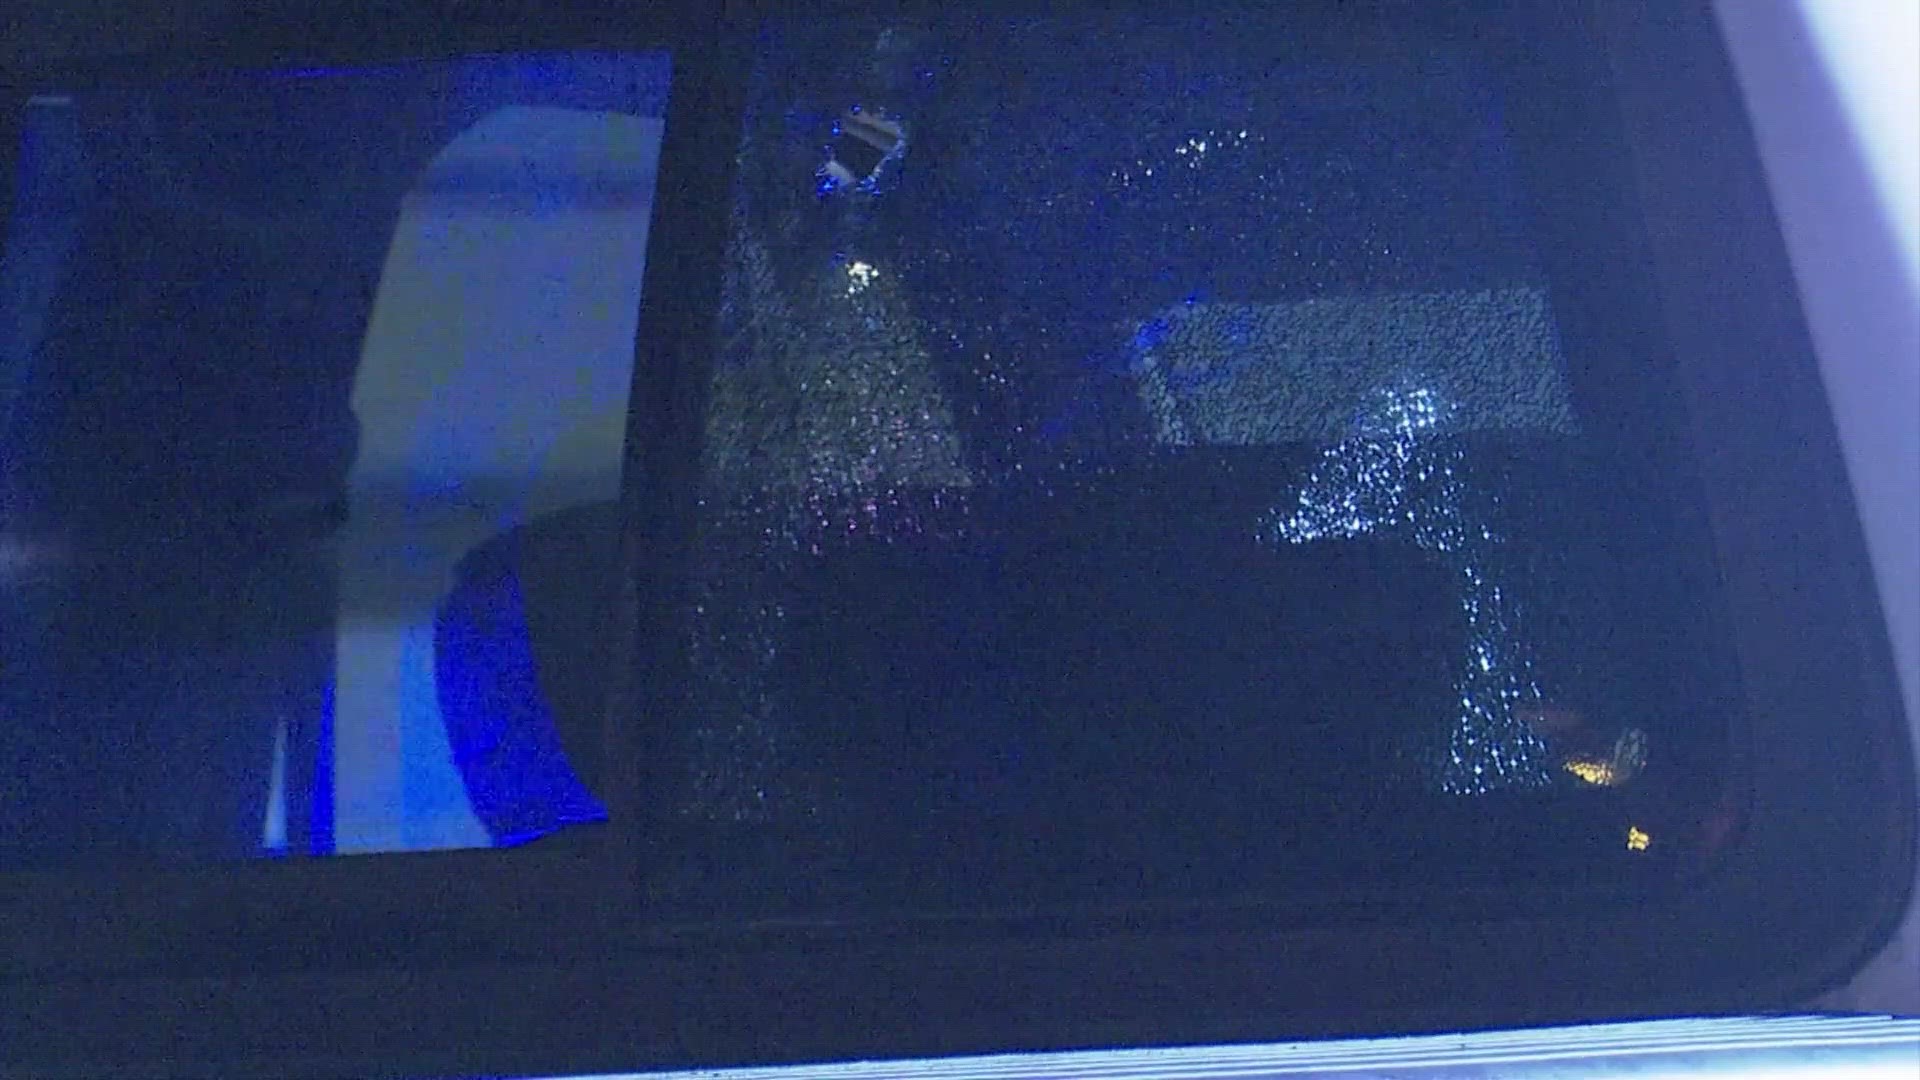 A woman is recovering after she was hurt when someone began shooting at her car in the Alief area Monday night, according to the Harris County Sheriff’s Office.